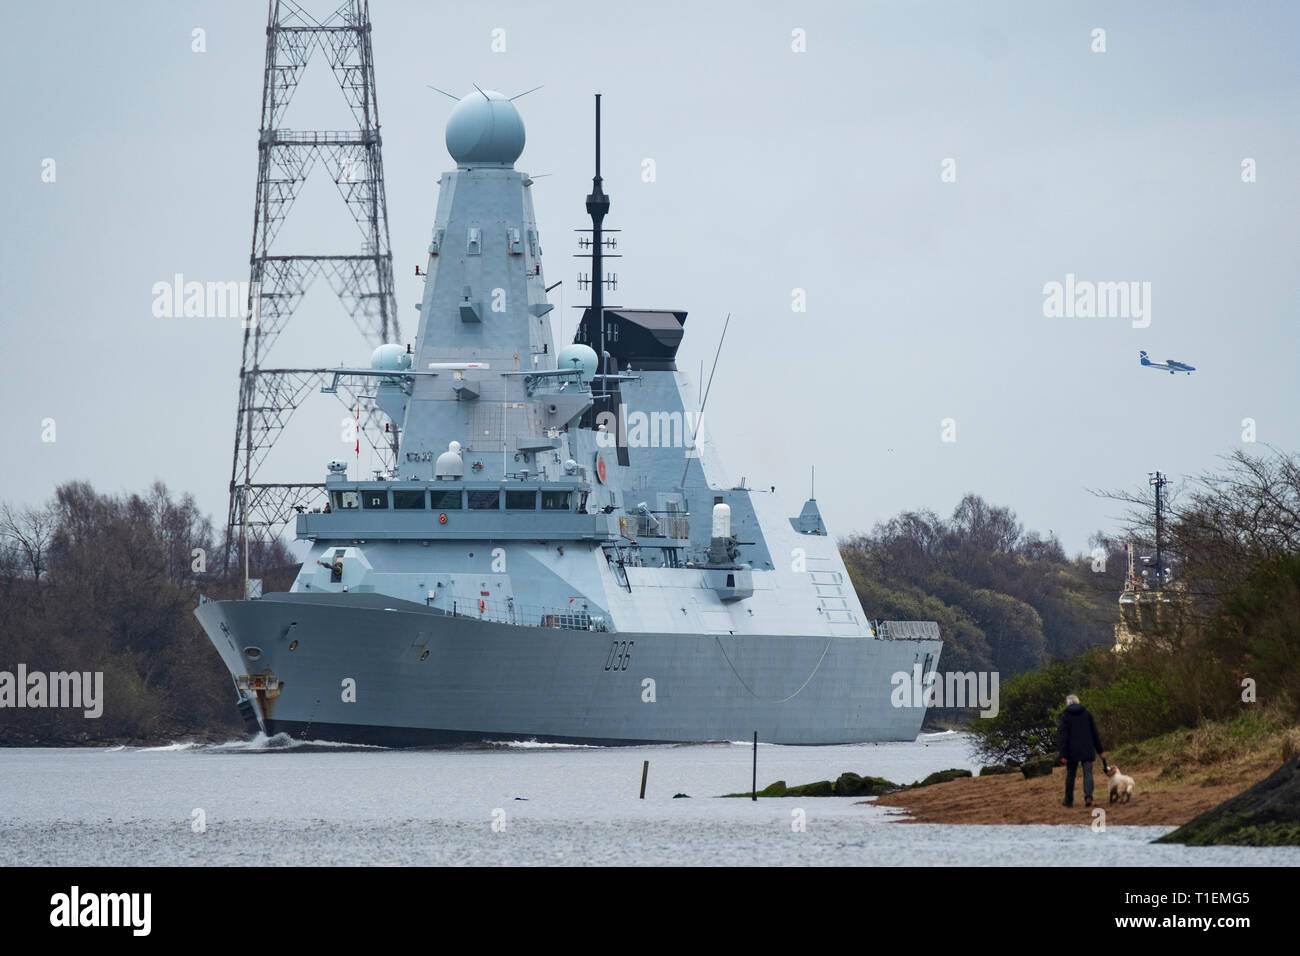 Erskine, Scotland, UK. 26th Mar, 2019. HMS Defender, a Type 45 Destroyer, leaves Glasgow and sails to sea on the River Clyde under the Erskine Bridge after her first home visit in 5 years. Built at Govan on the Clyde, HMS Defender will now join Exercise Joint Warrior, a multi national military exercise off the west coast of Scotland. Credit: Iain Masterton/Alamy Live News Stock Photo